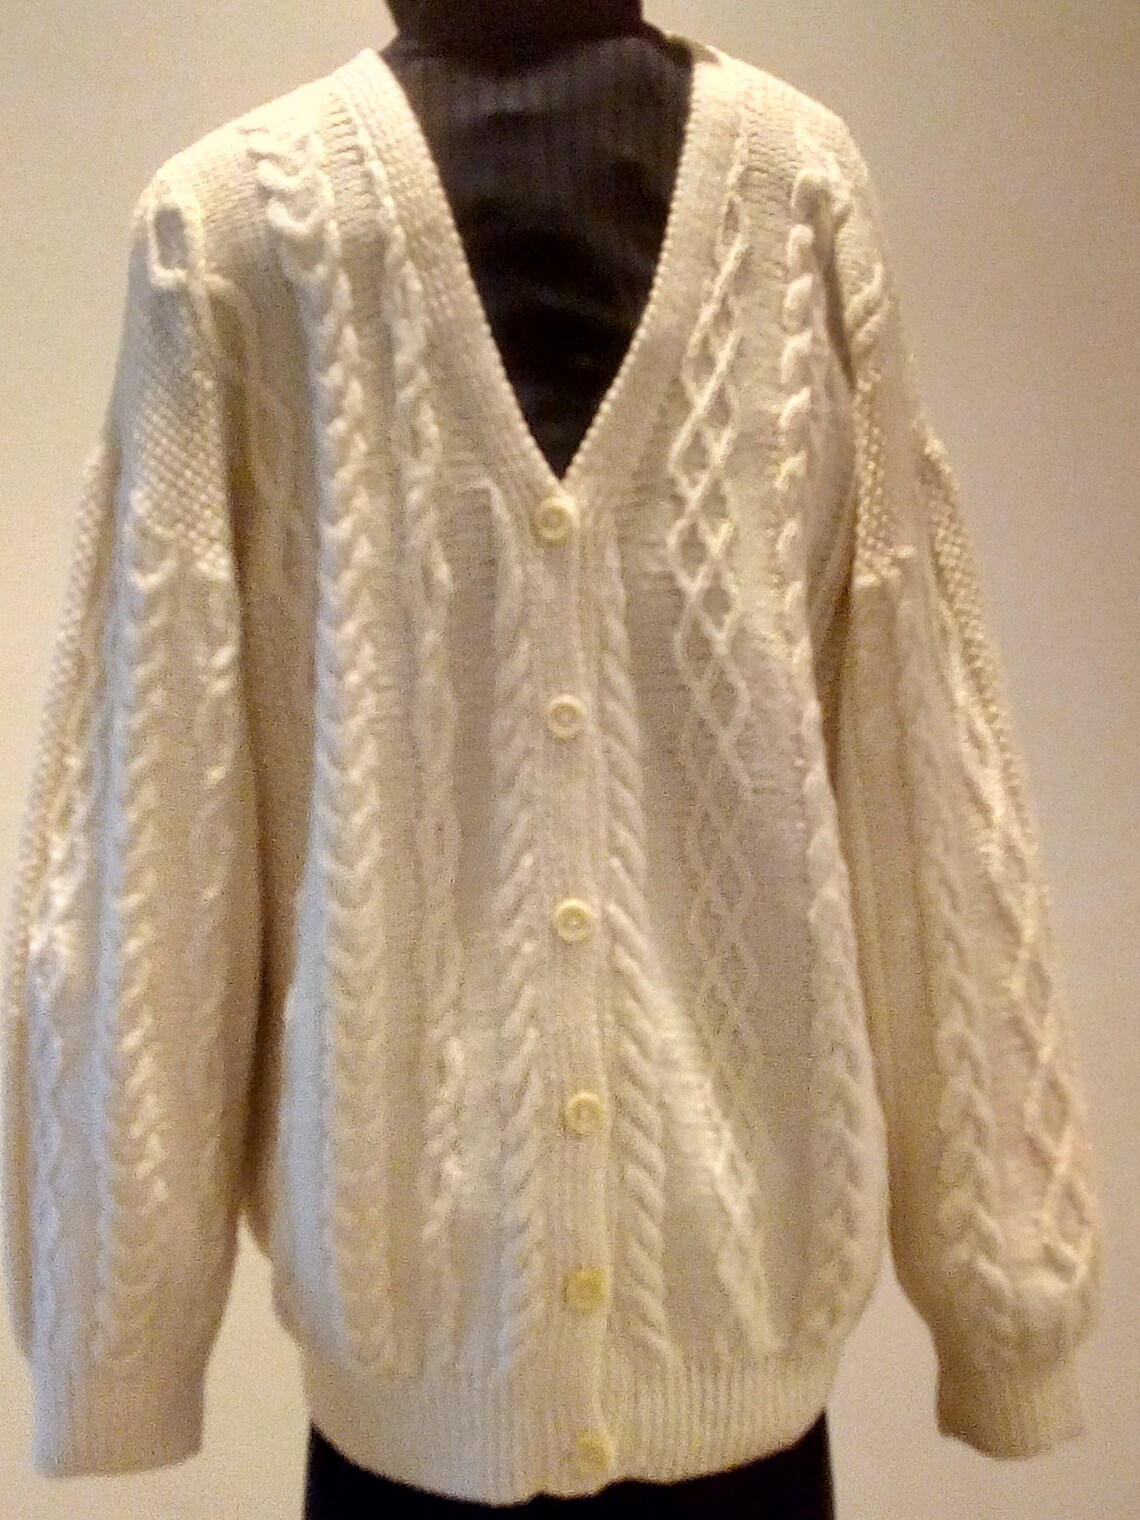 Hand Knitted in Scotland. Aran Style Cardigan in Pure New | Etsy